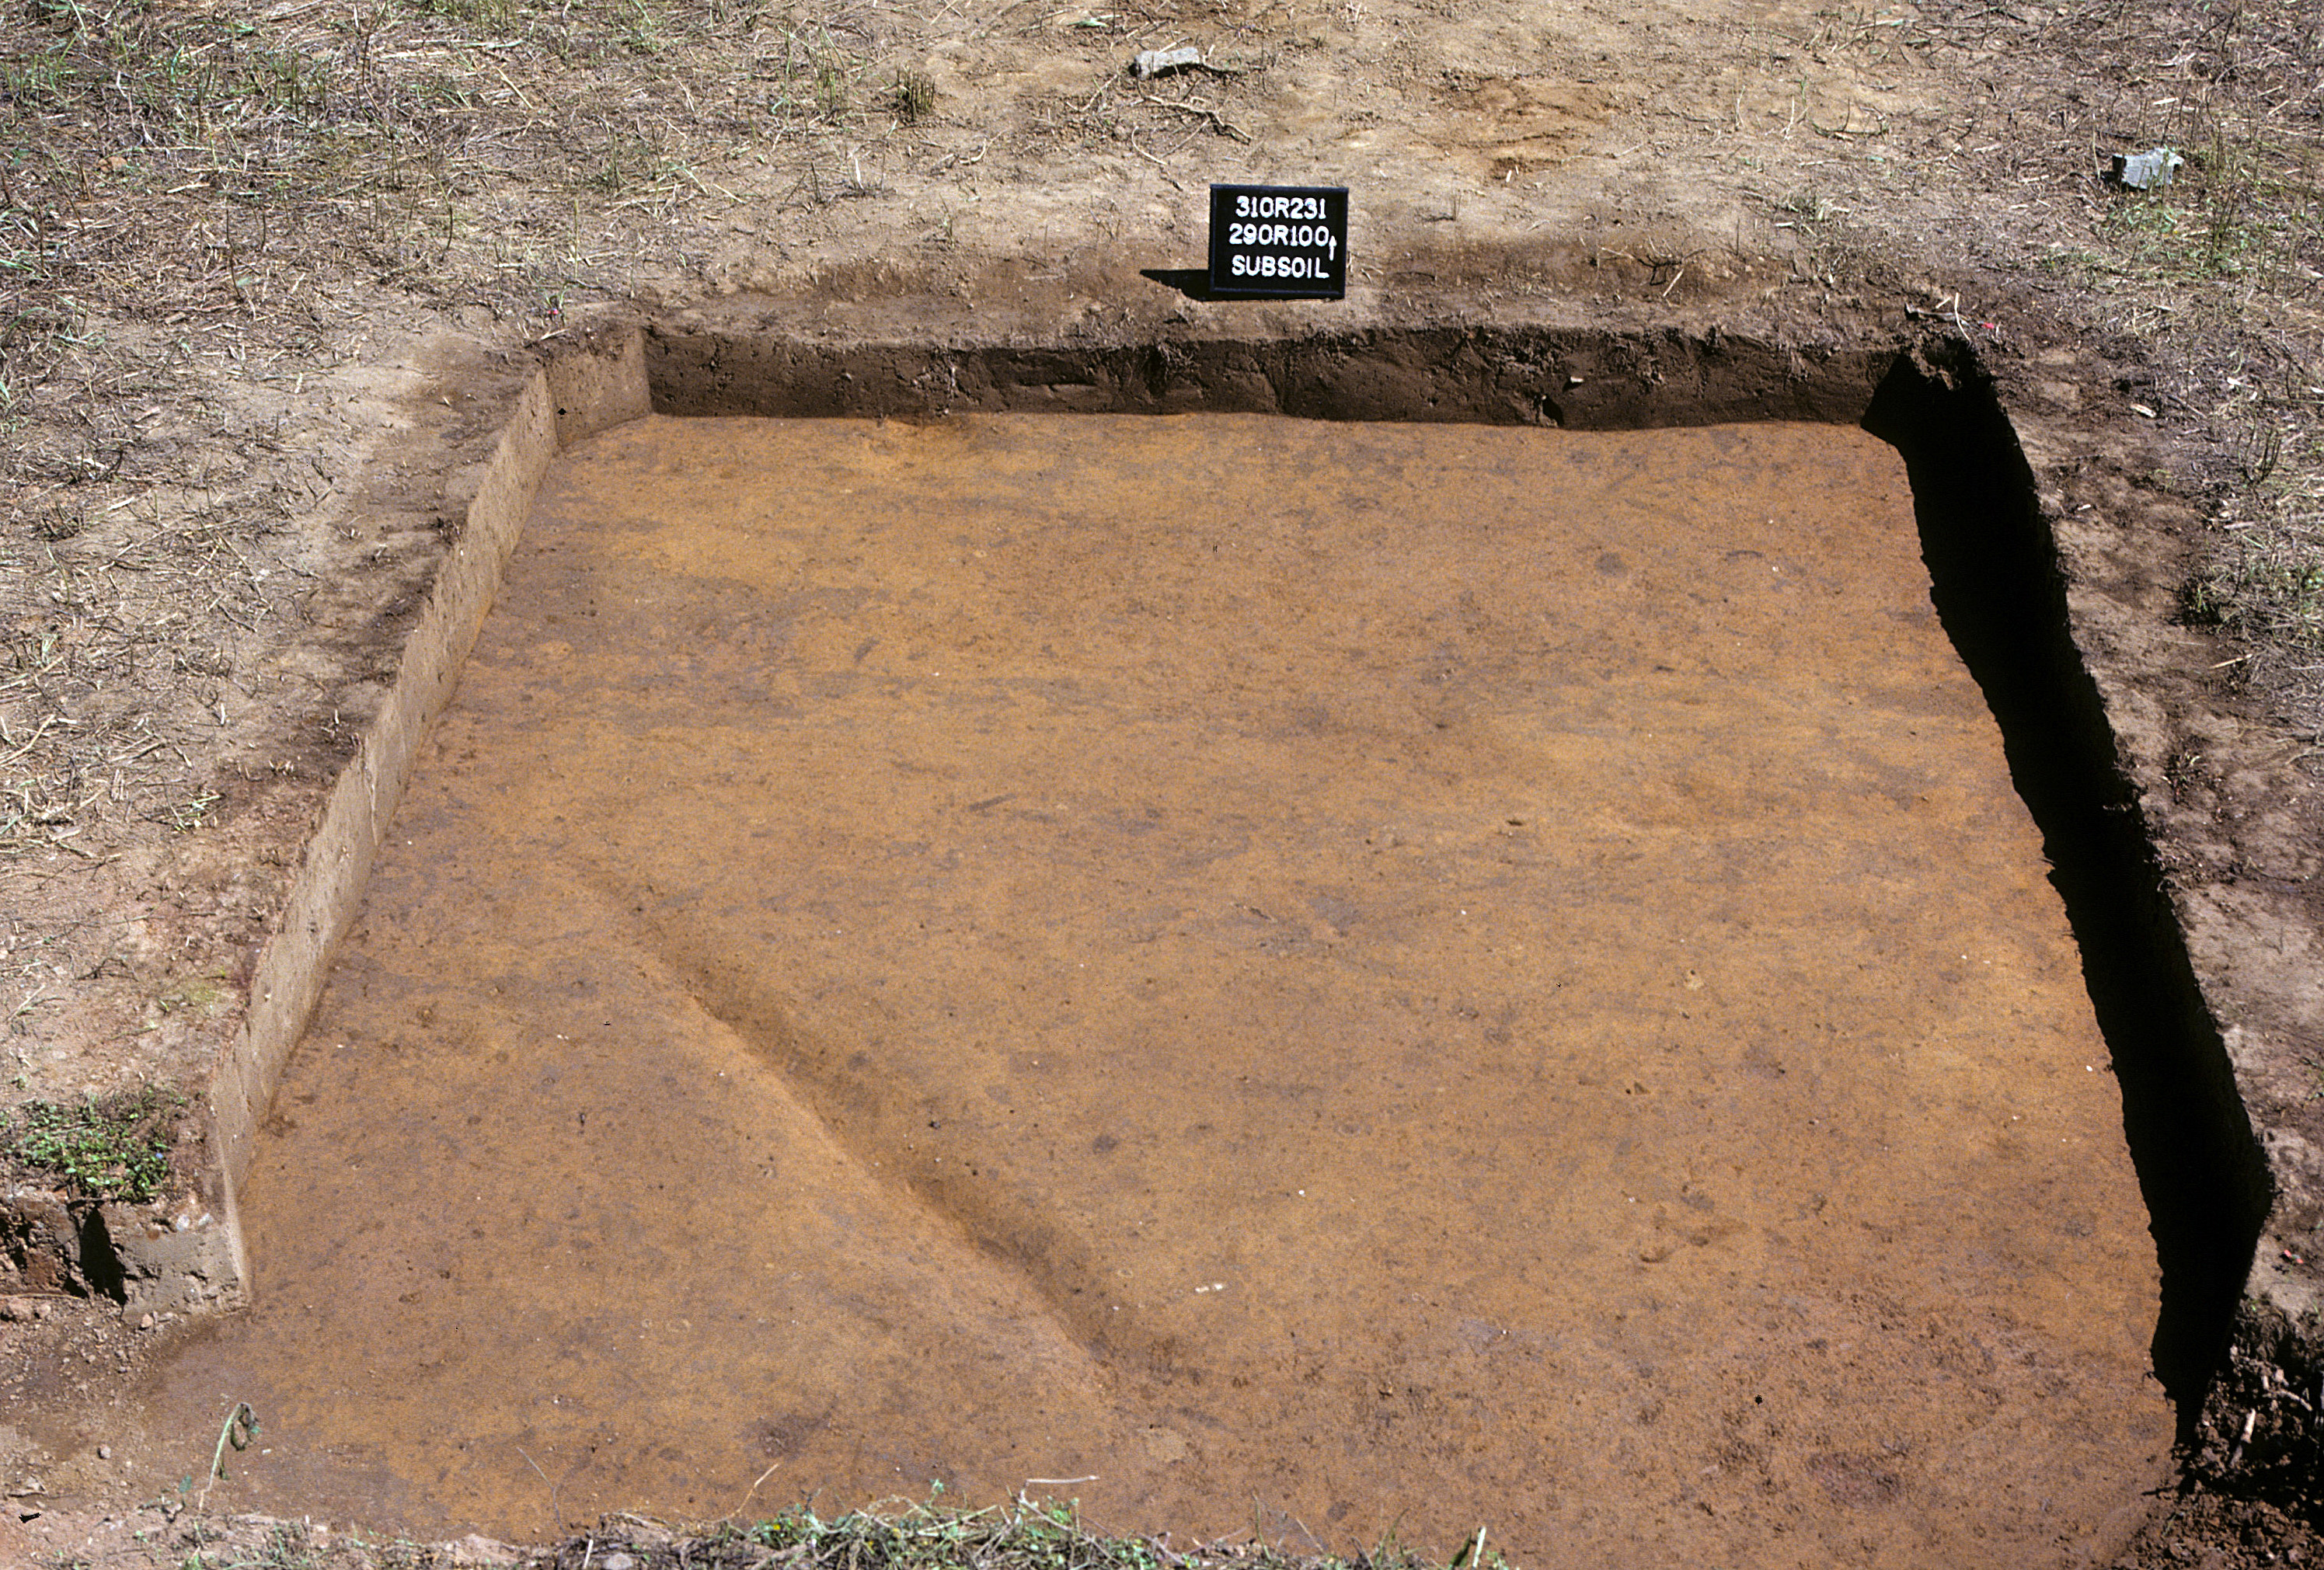 Figure 973. Sq. 290R100 at top of subsoil (view to north).